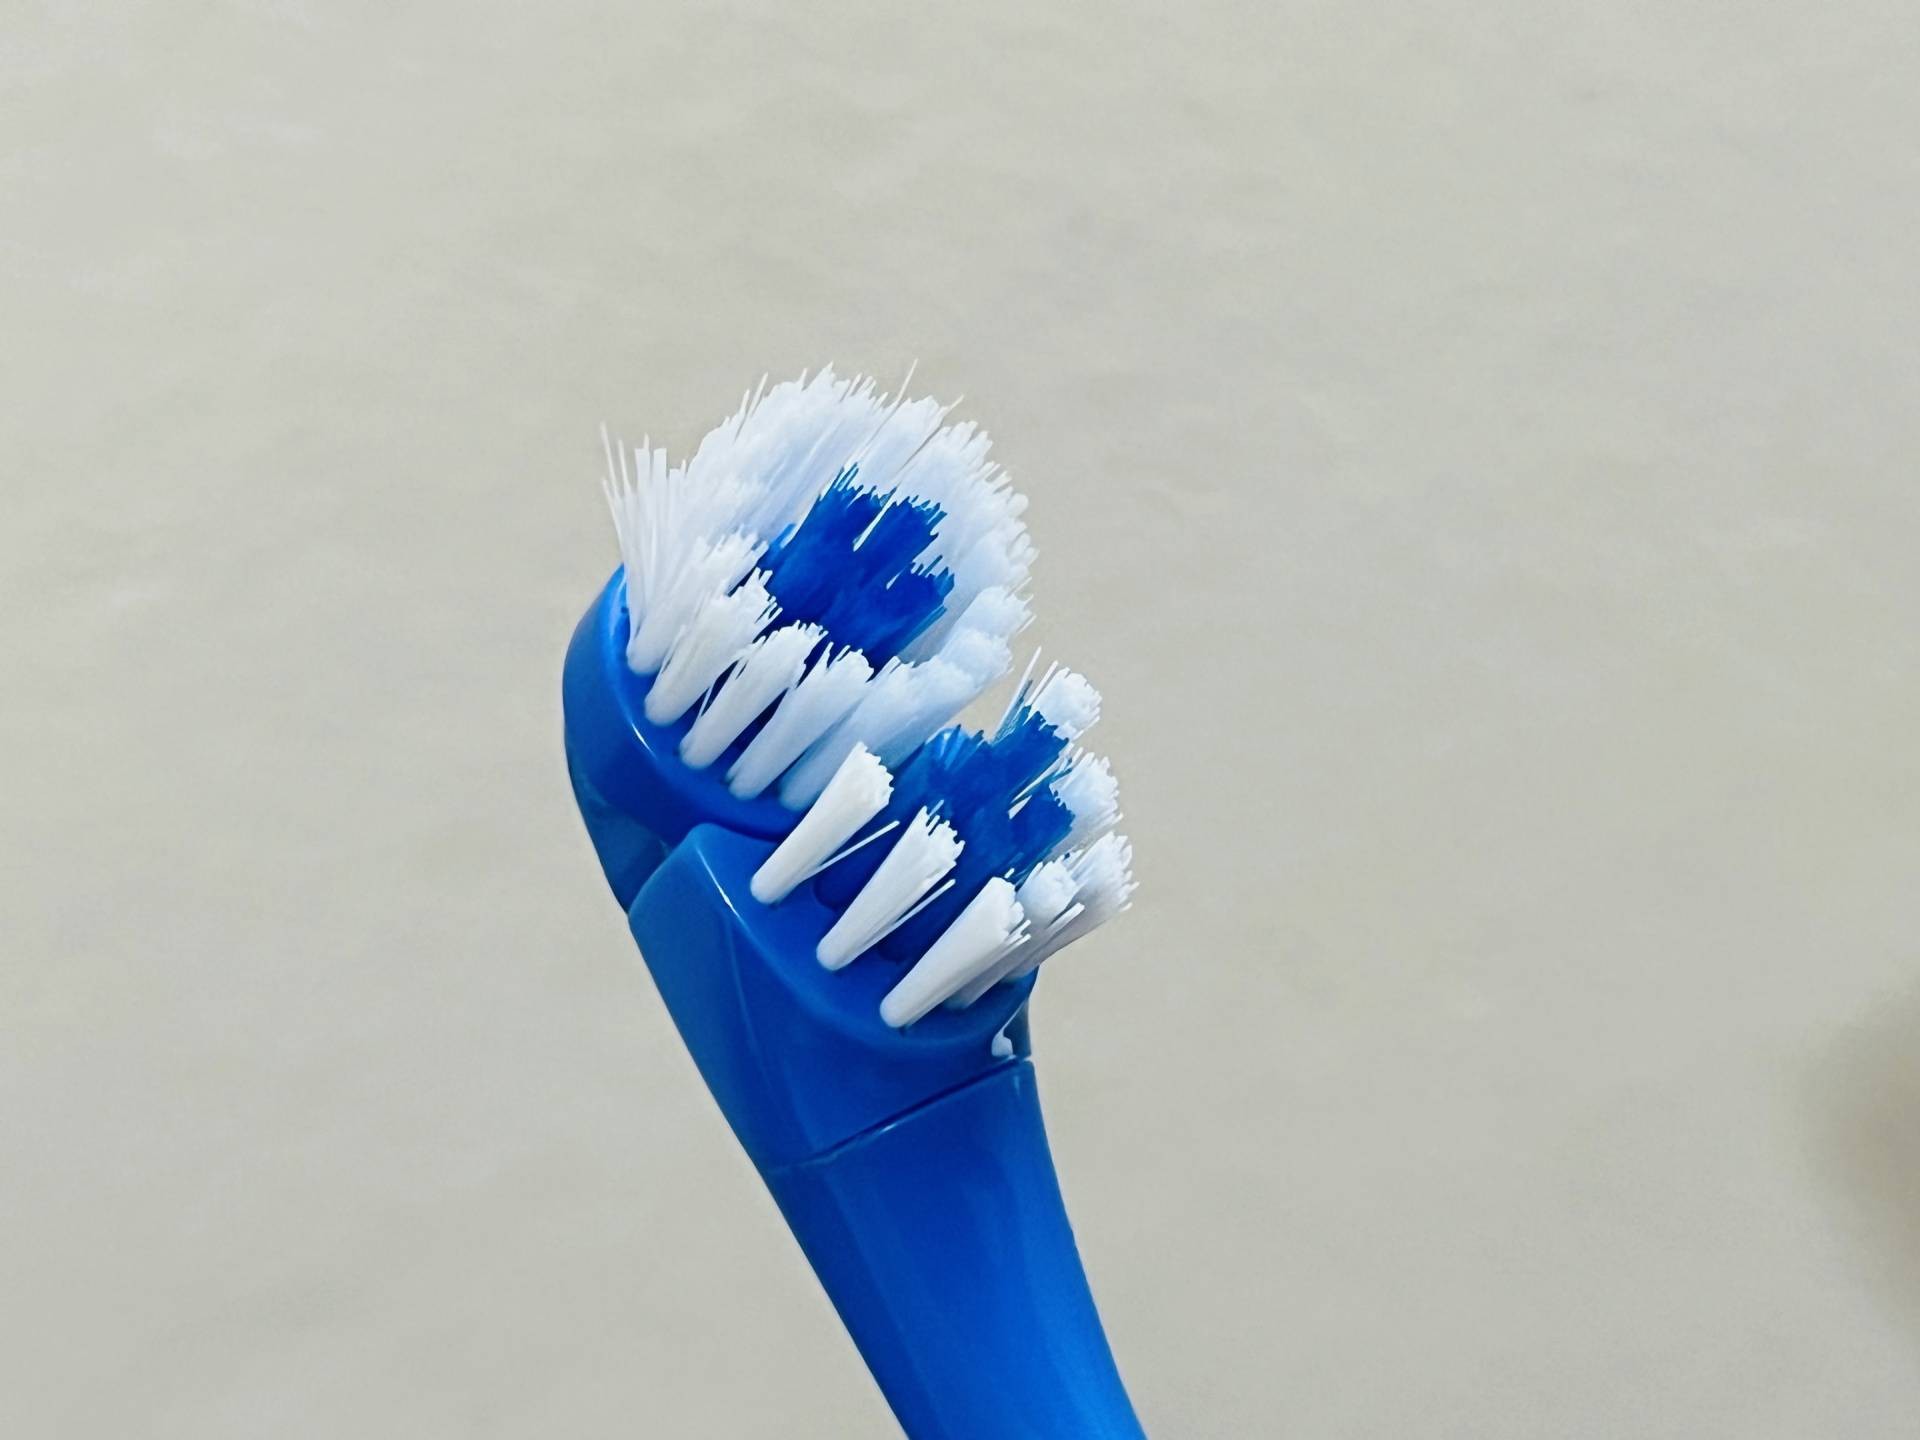 Are Round Toothbrush Heads Better?